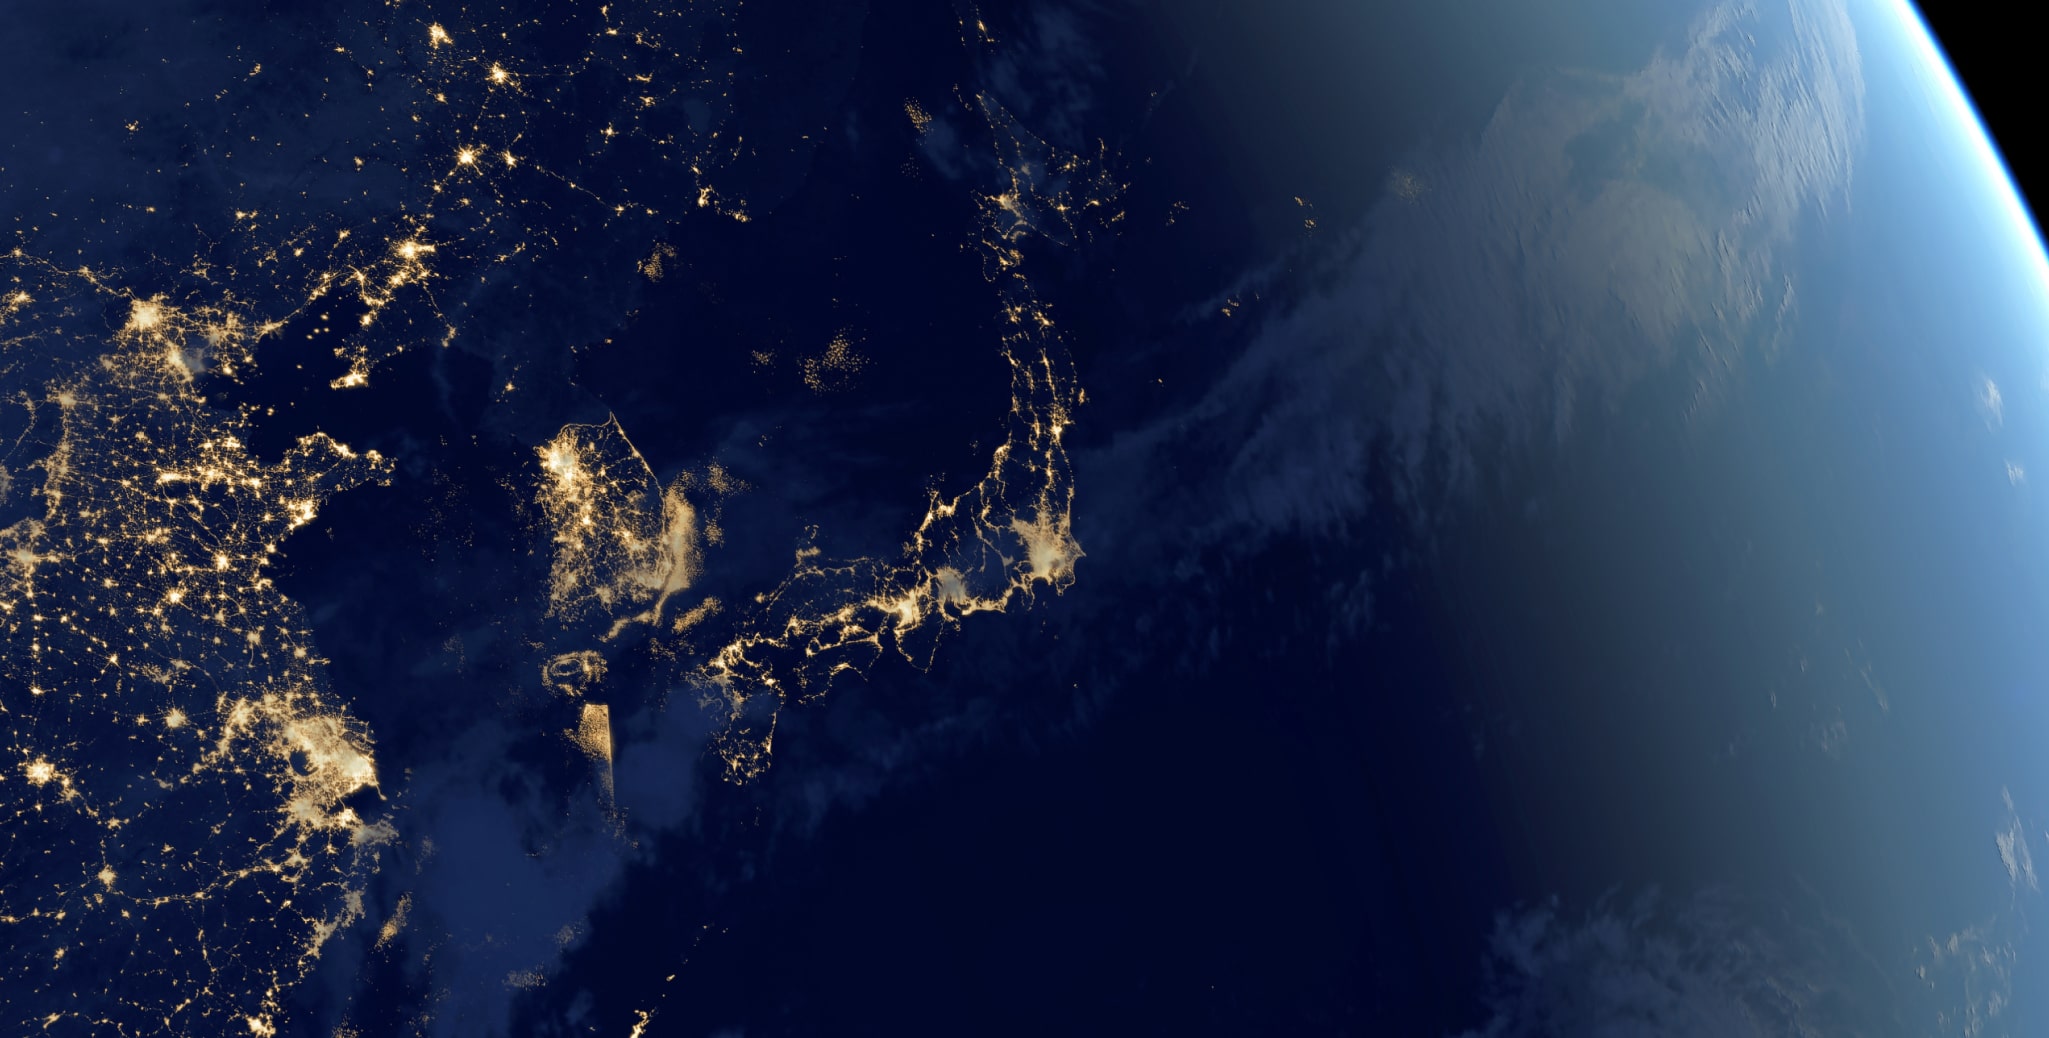 Image of Japan seen from space